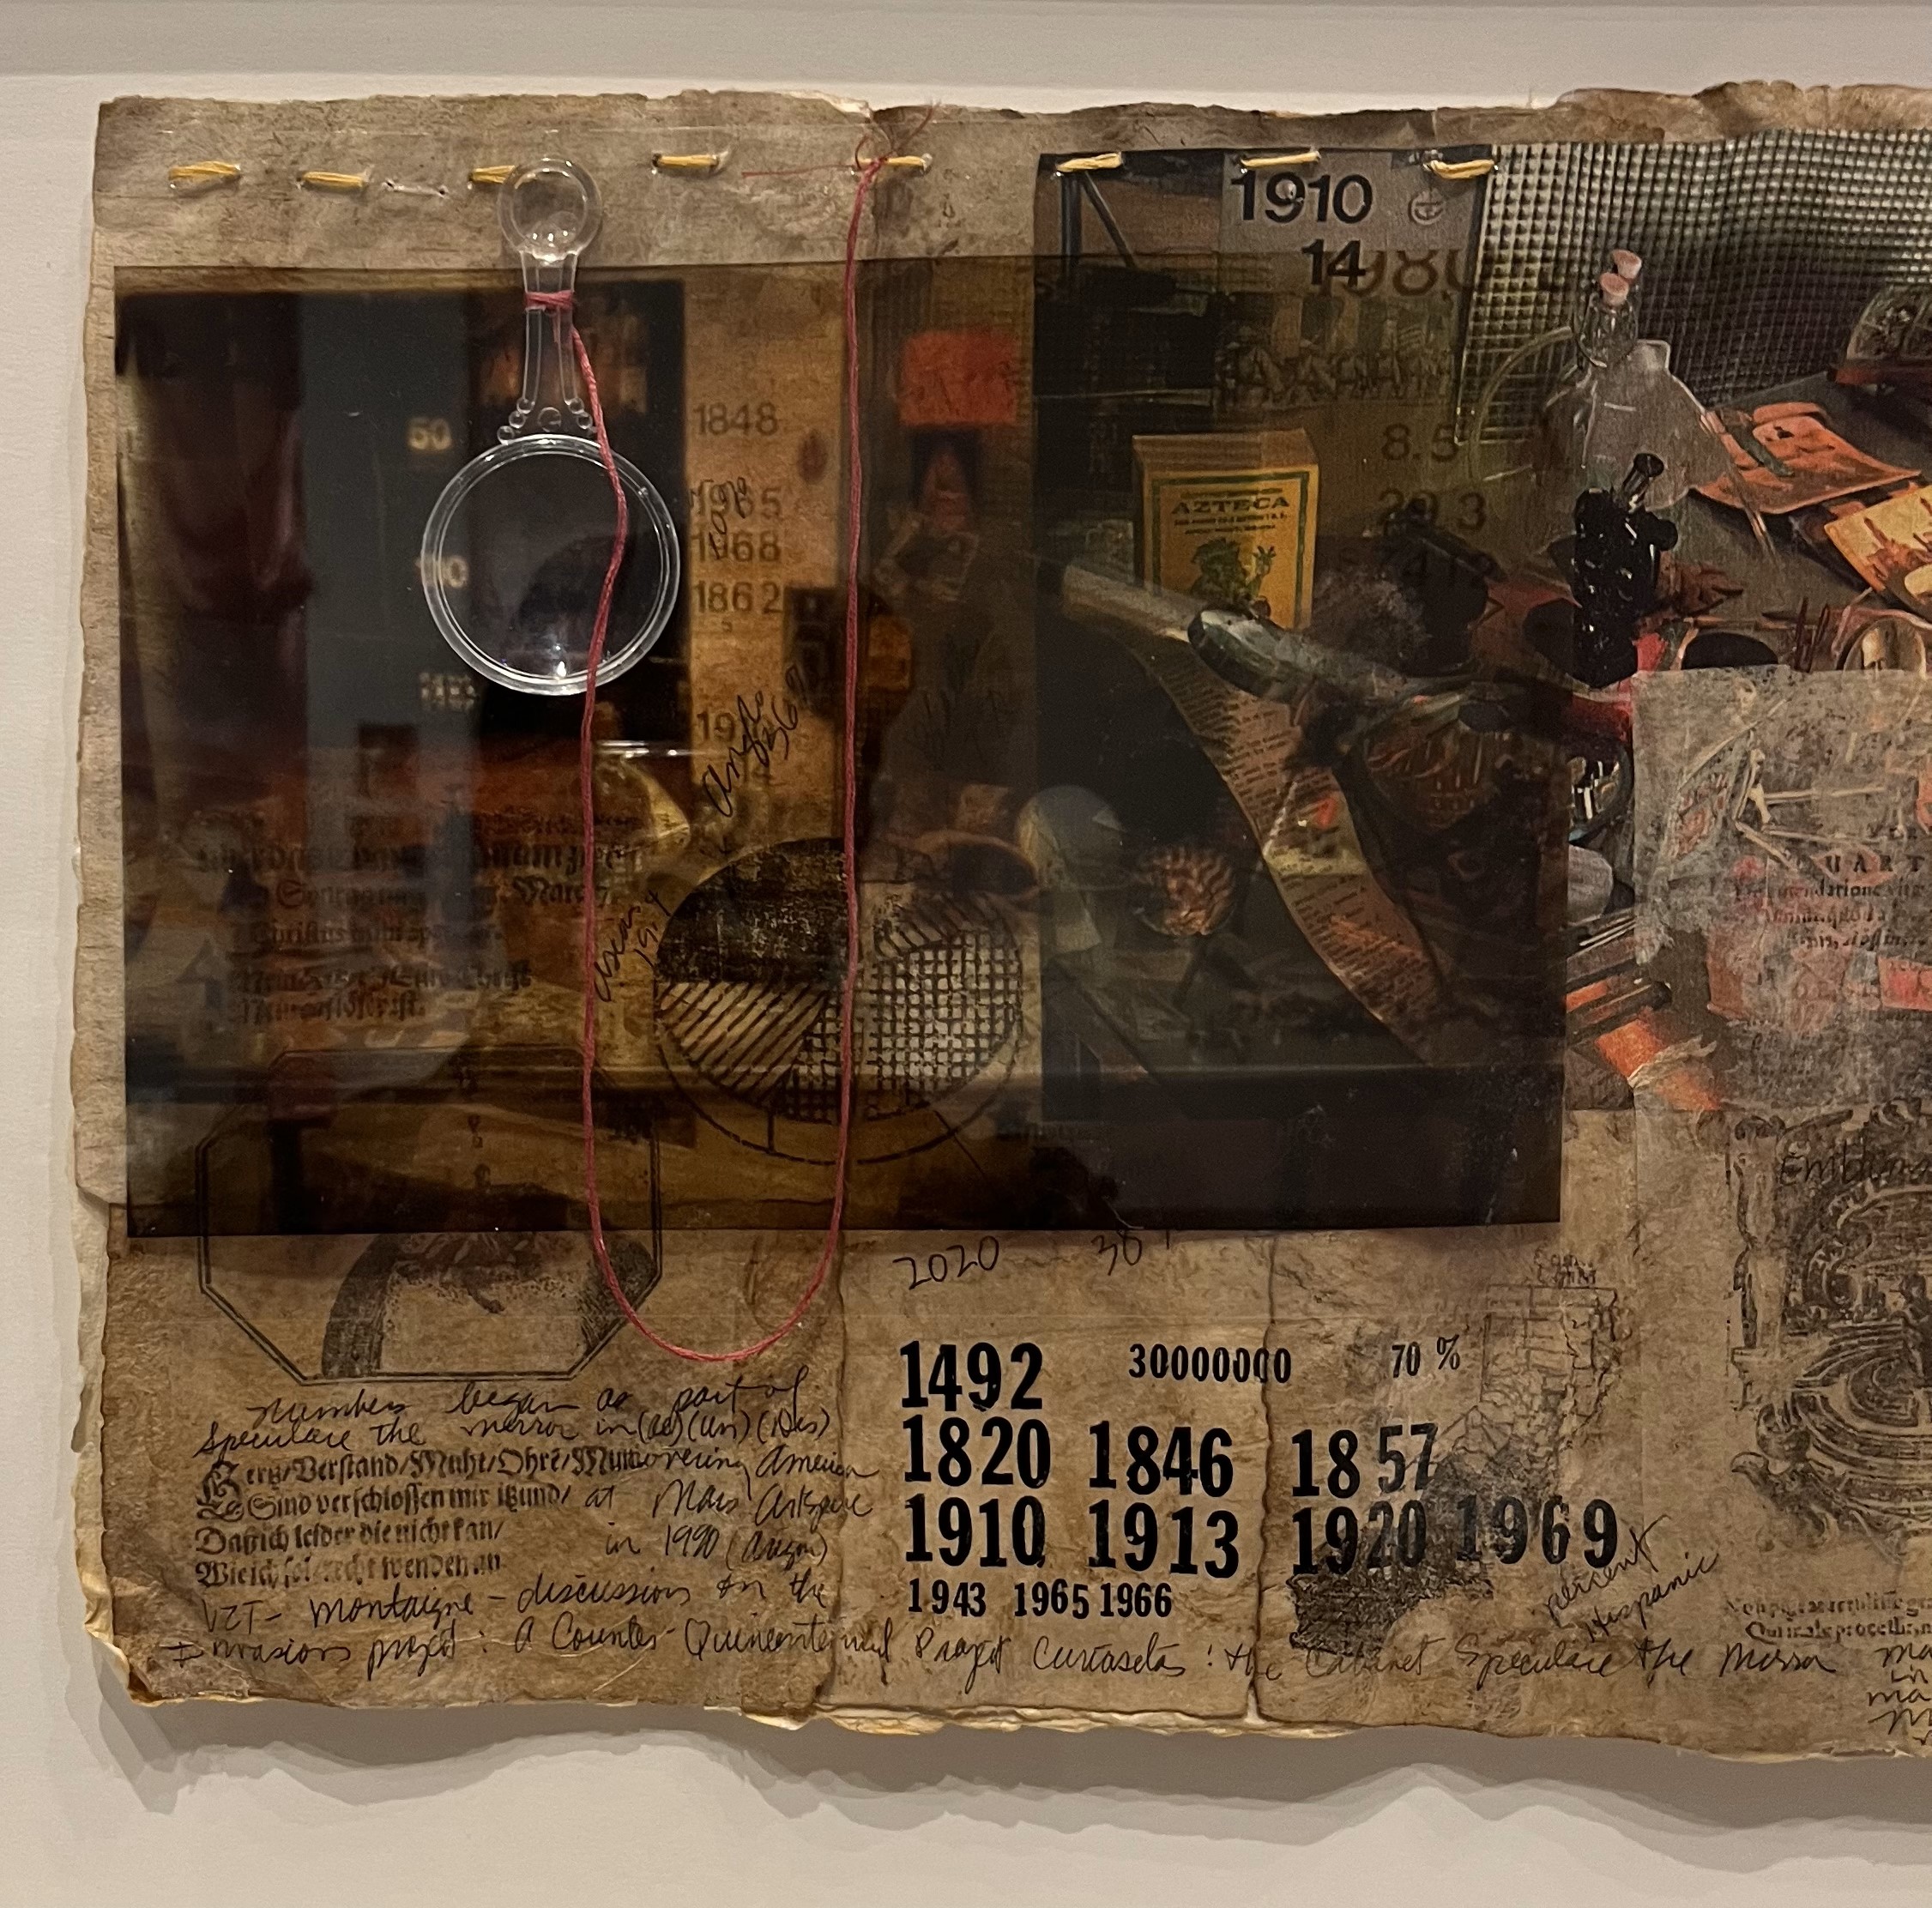 Collaged composition with small plastic magnifying glass hanging from the upper left. Printed at the bottom are the dates 1492, 1820, 1846, 1857, 1910, 1813, 1820, 1969, 1943, 1965, 1966